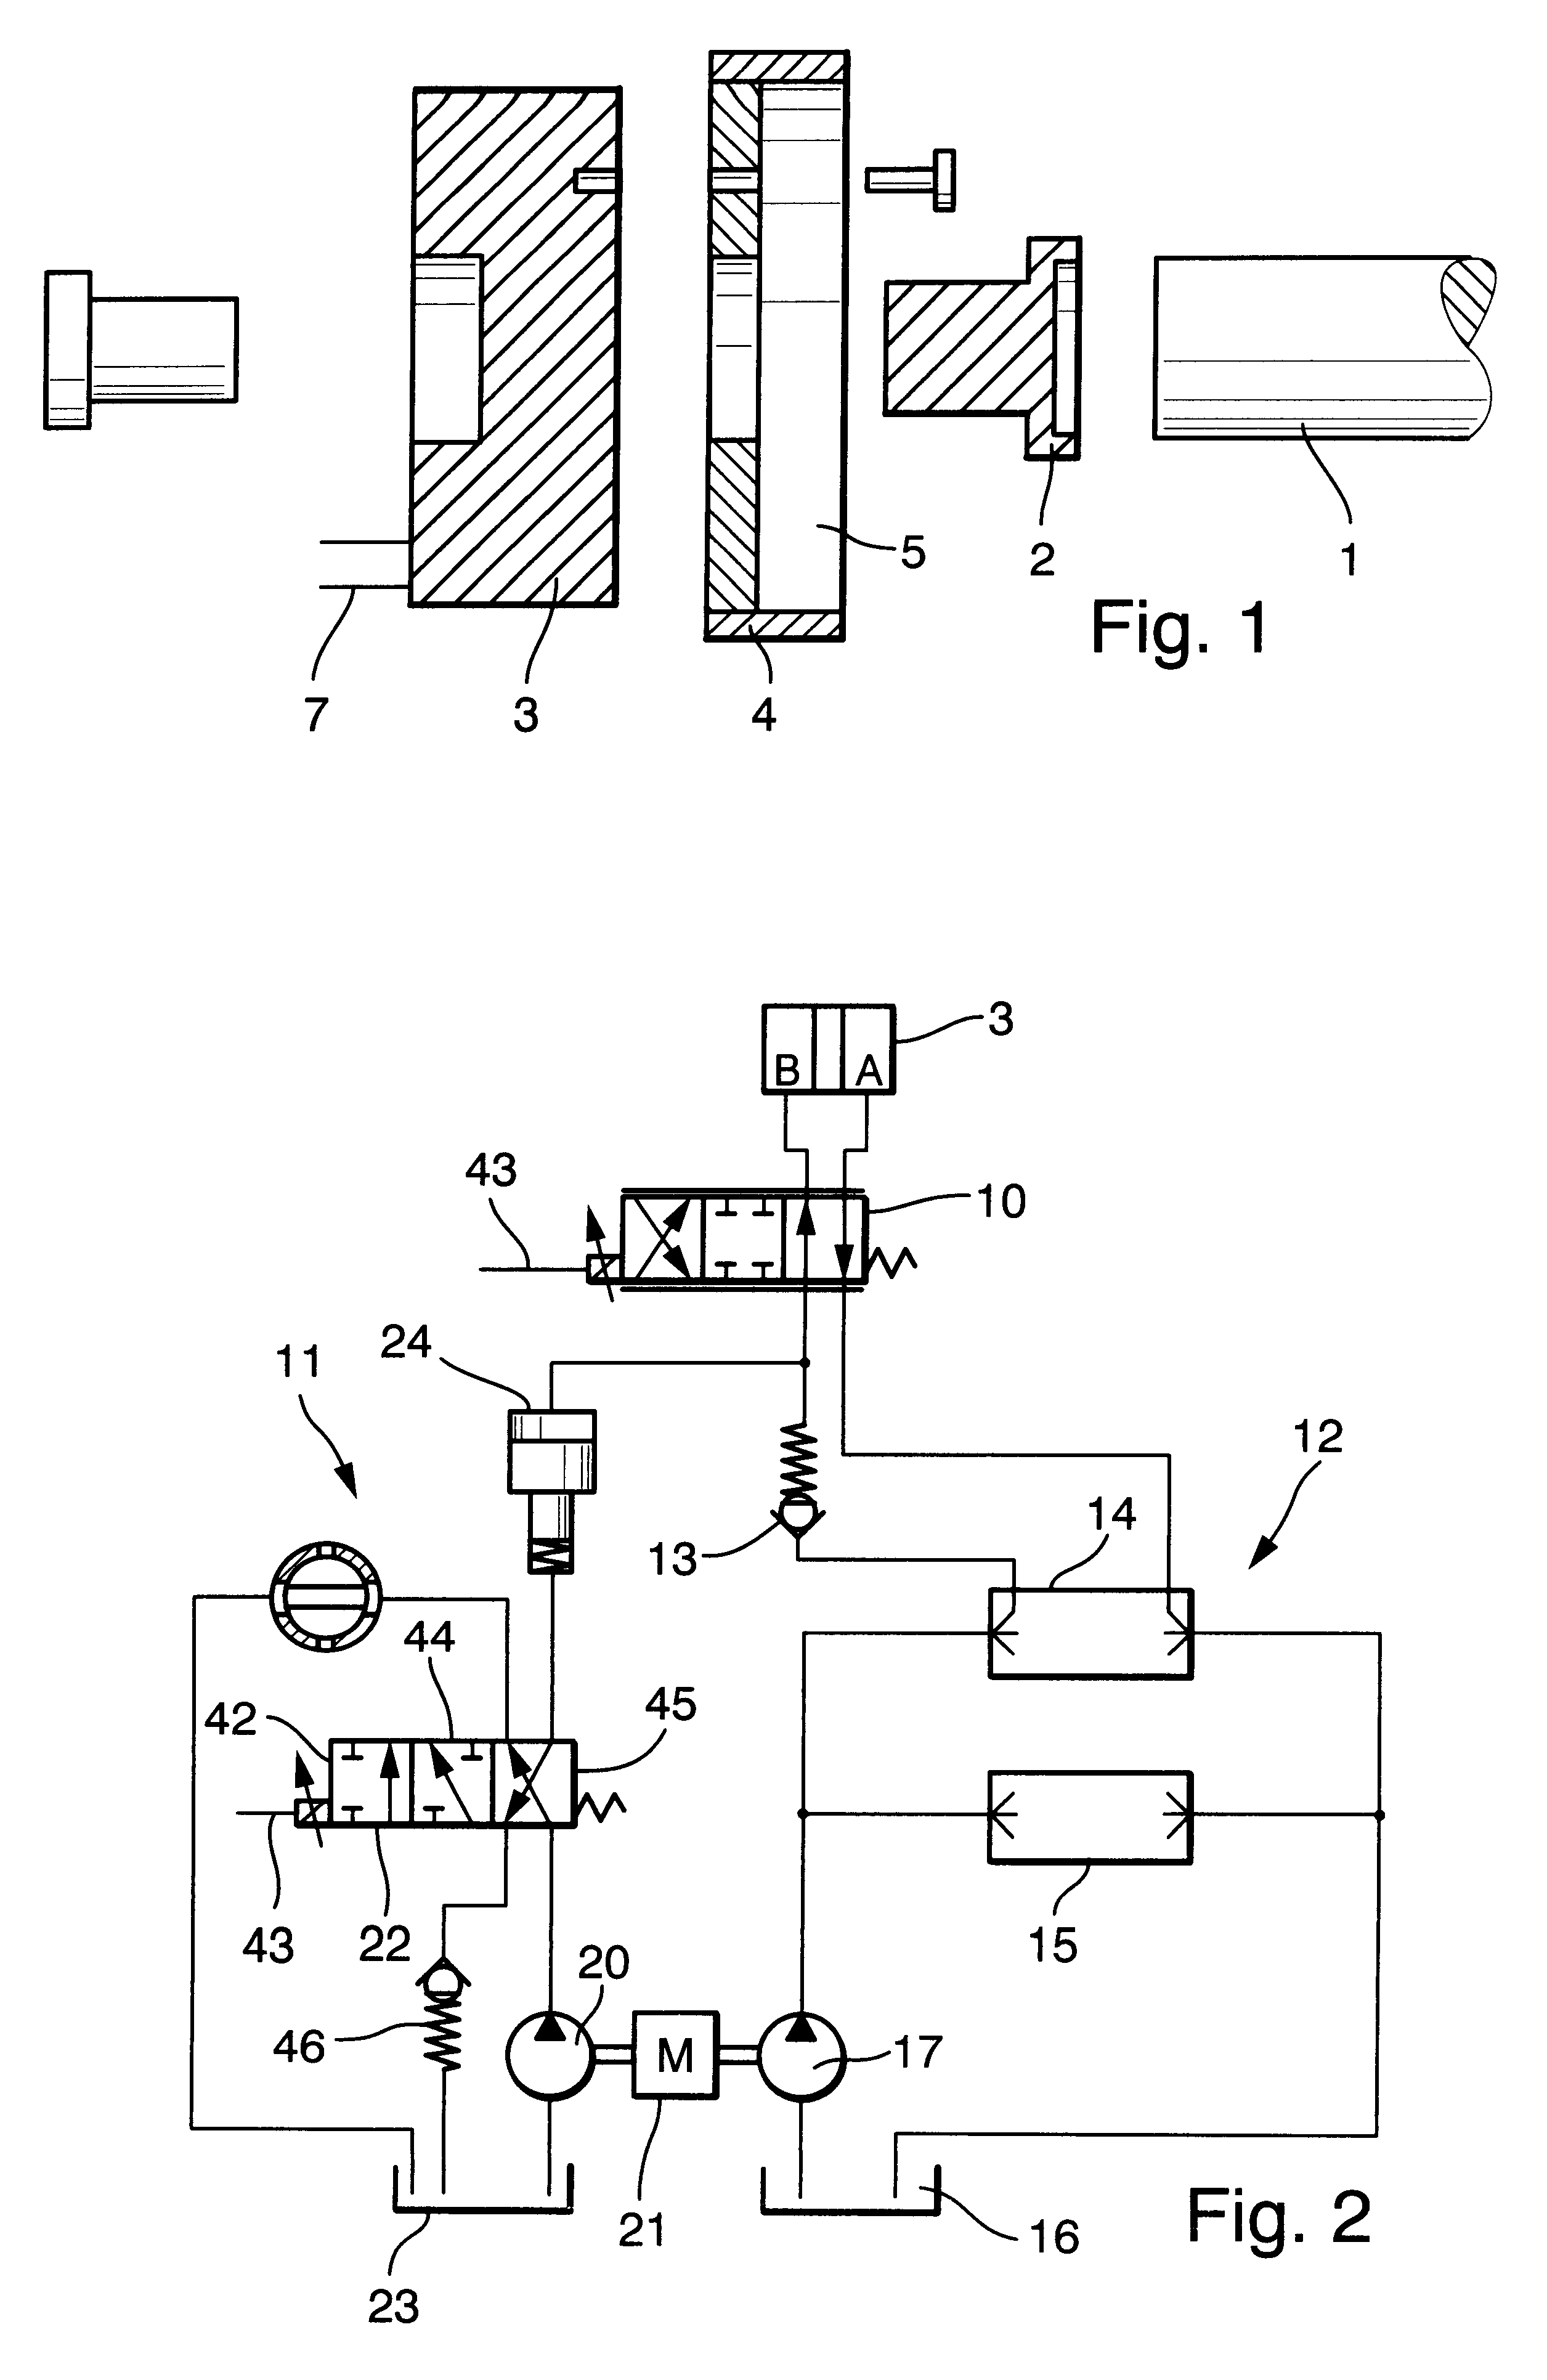 Apparatus for angular adjustment of camshafts relative to crankshafts in combustion engines